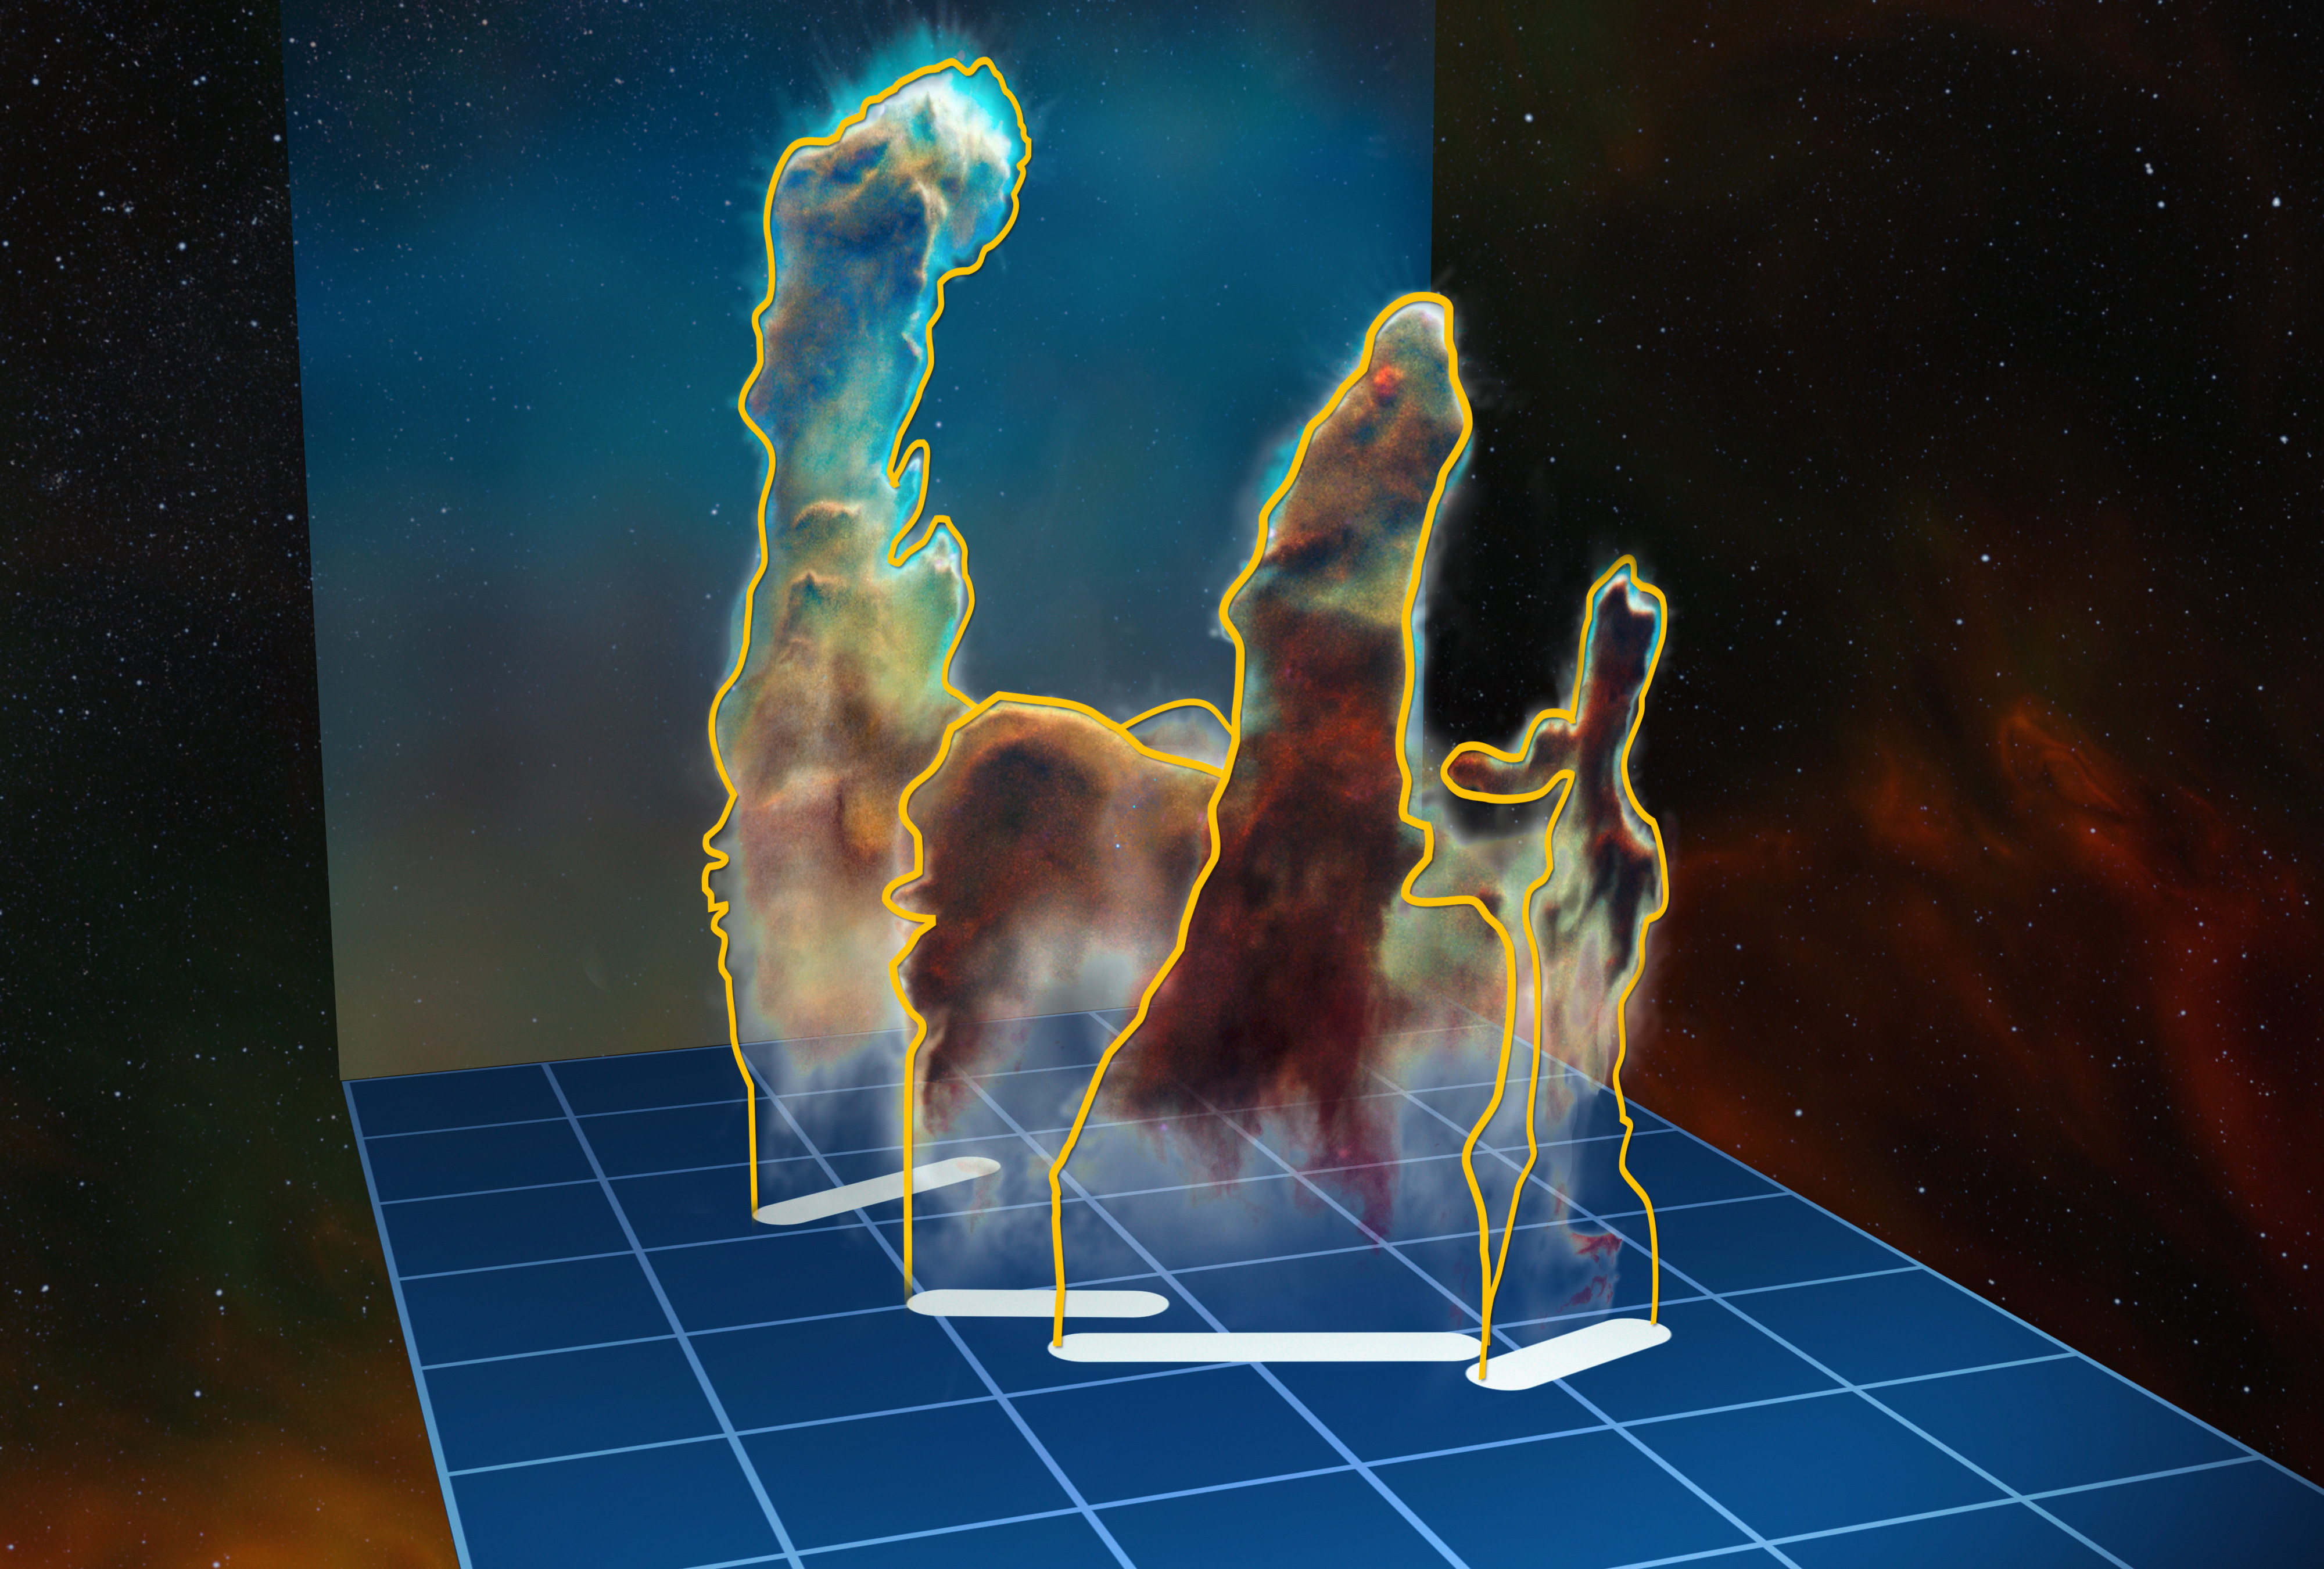 This visualisation of the three-dimensional structure of the Pillars of Creation within the star formation region Messier 16 (also called the Eagle Nebula) is based on new observations of the object using the MUSE instrument on ESO’s Very Large Telescope in Chile. The pillars actually consist of several distinct pieces on either side of the star cluster NGC 6611. In this illustration, the relative distance between the pillars along the line of sight is not to scale. Credit: ESO/M. Kornmesser